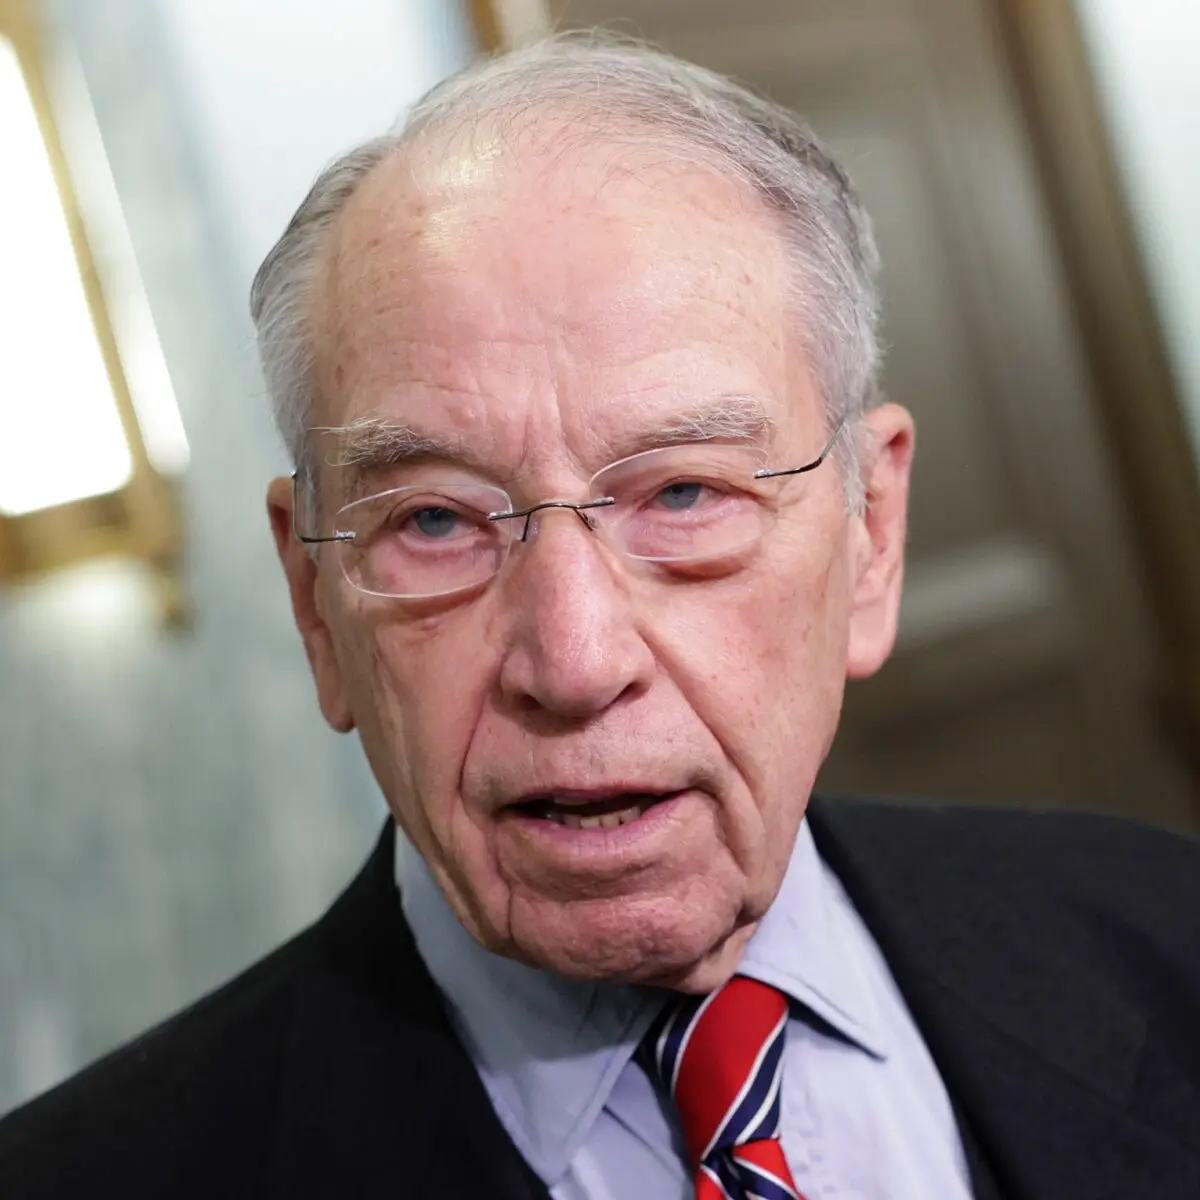 U.S. Senate Judiciary Committee Ranking Member Chuck Grassley (R-Iowa) speaks to the media on April 4, 2022, in Washington.  (Kevin Dietsch/Getty Images)